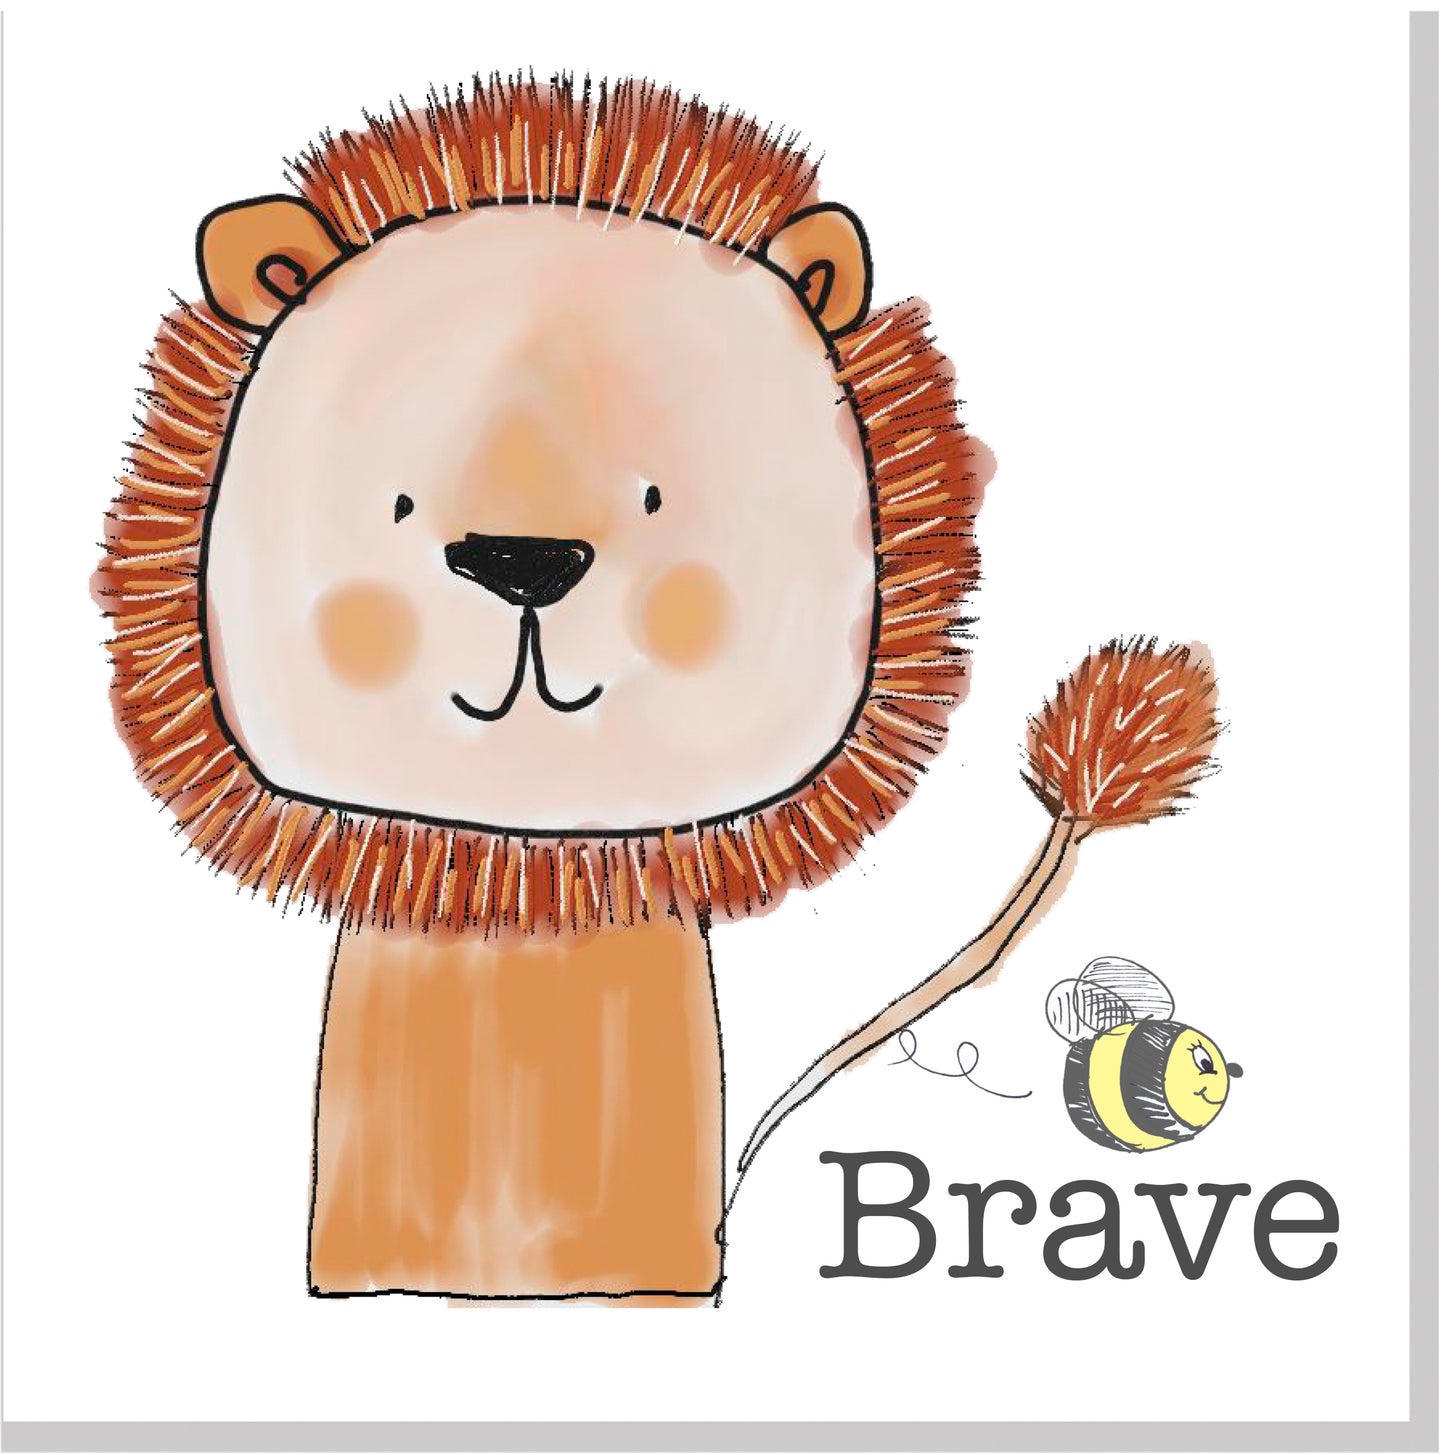 Be brave square card